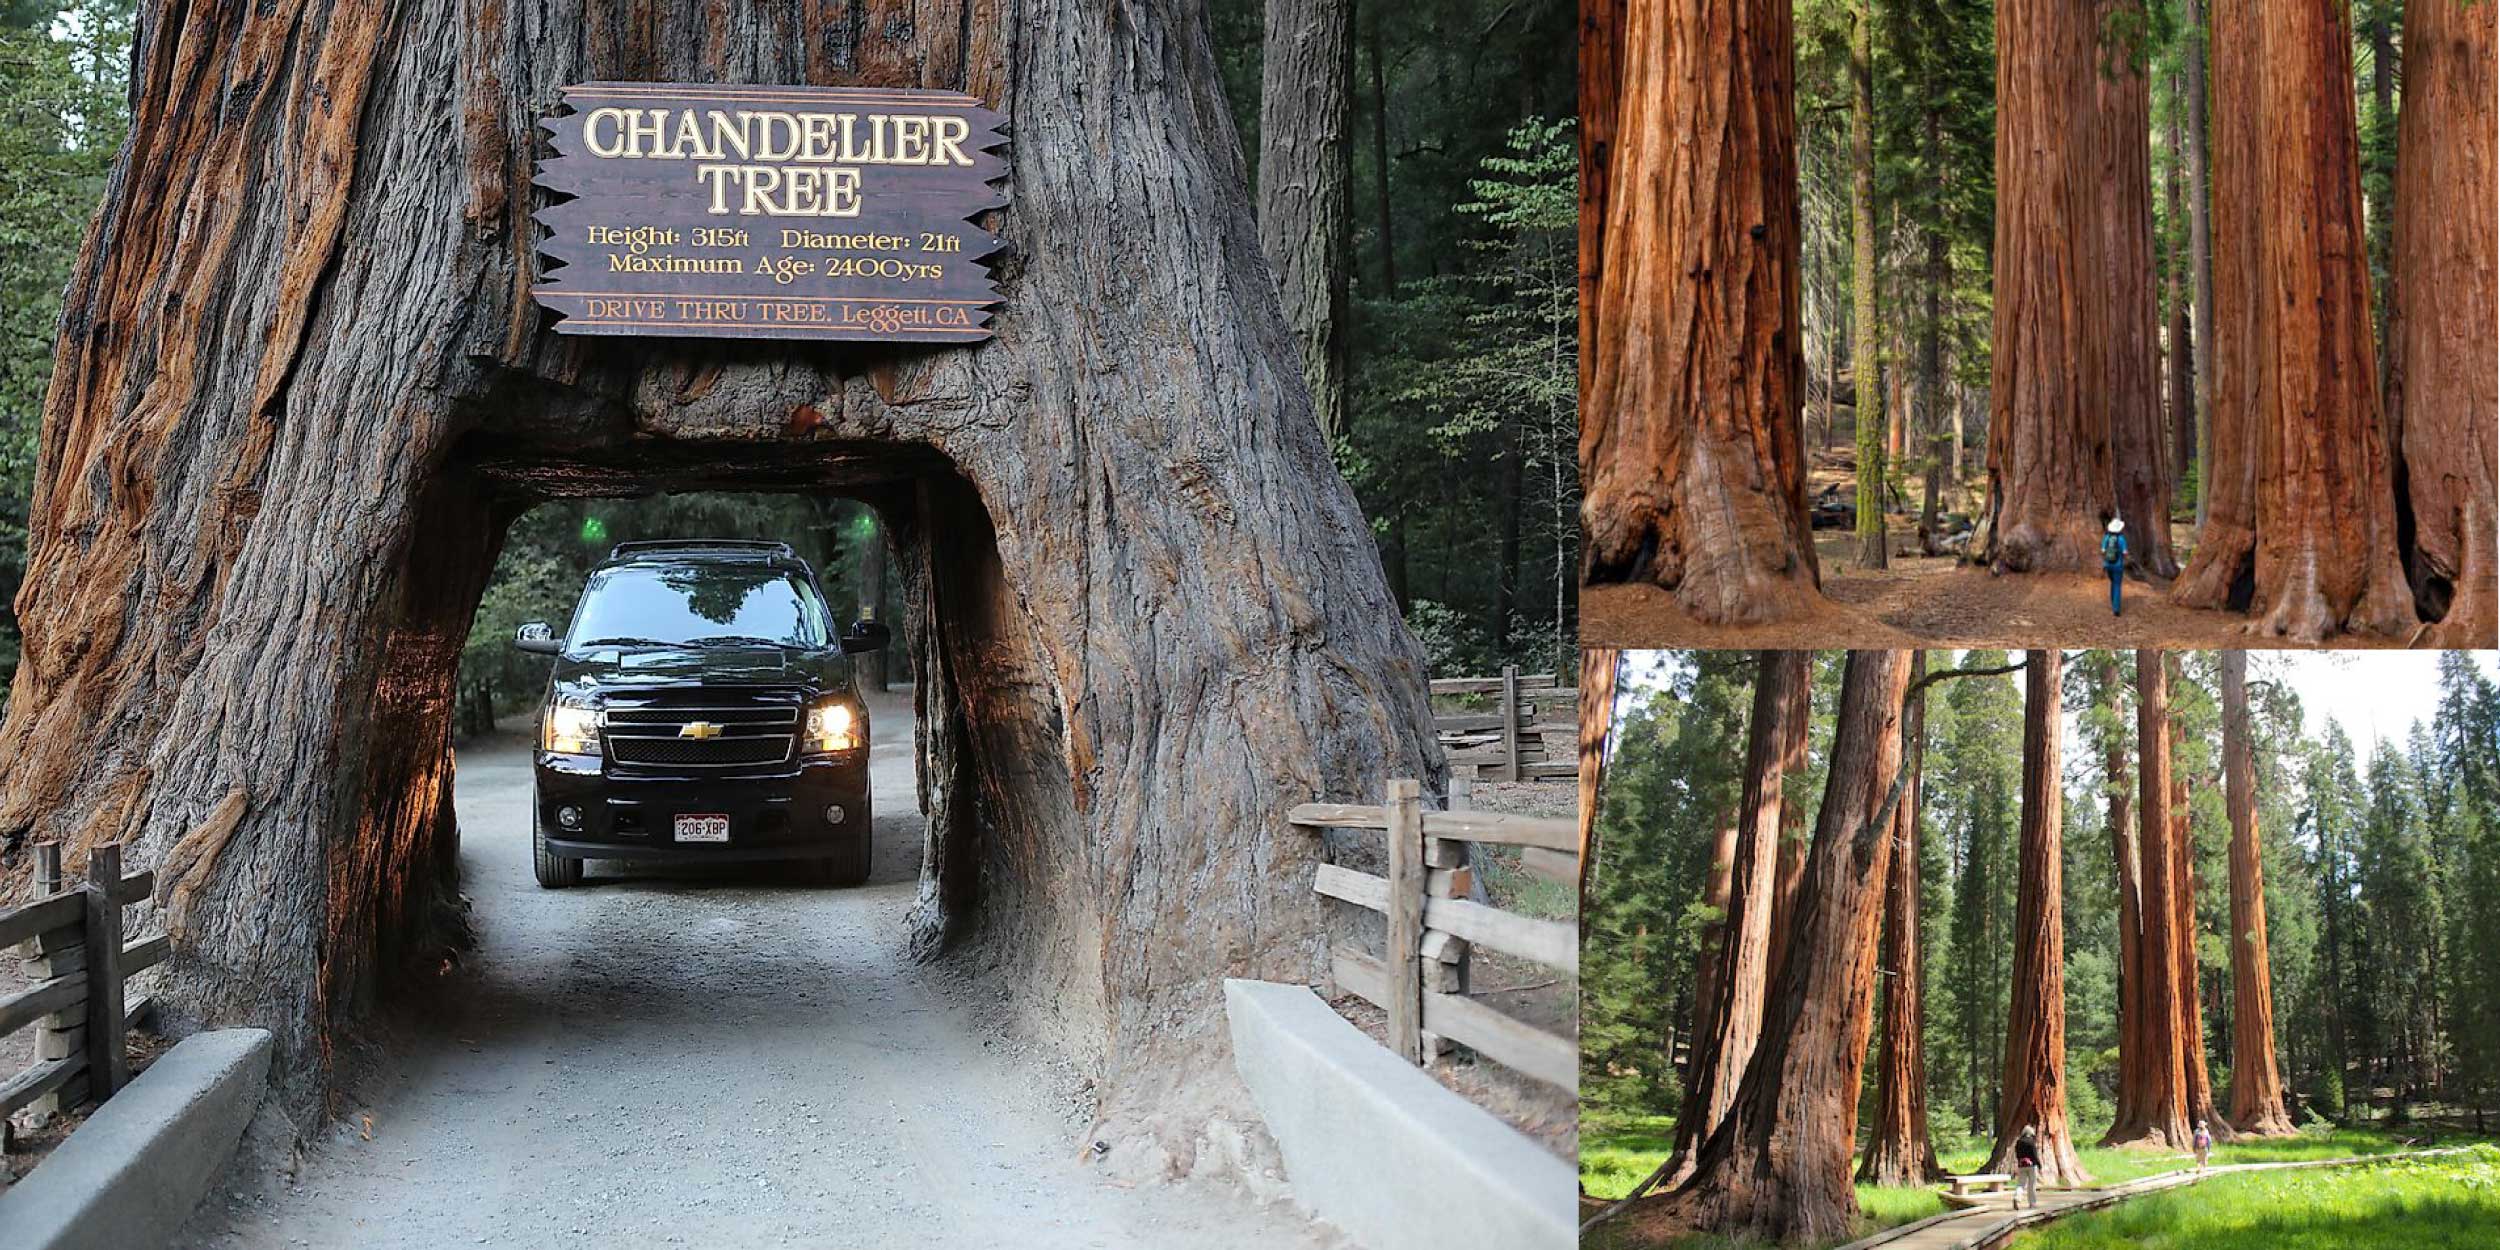 Best things to do in California - Giant redwoods in Sequoia National Park